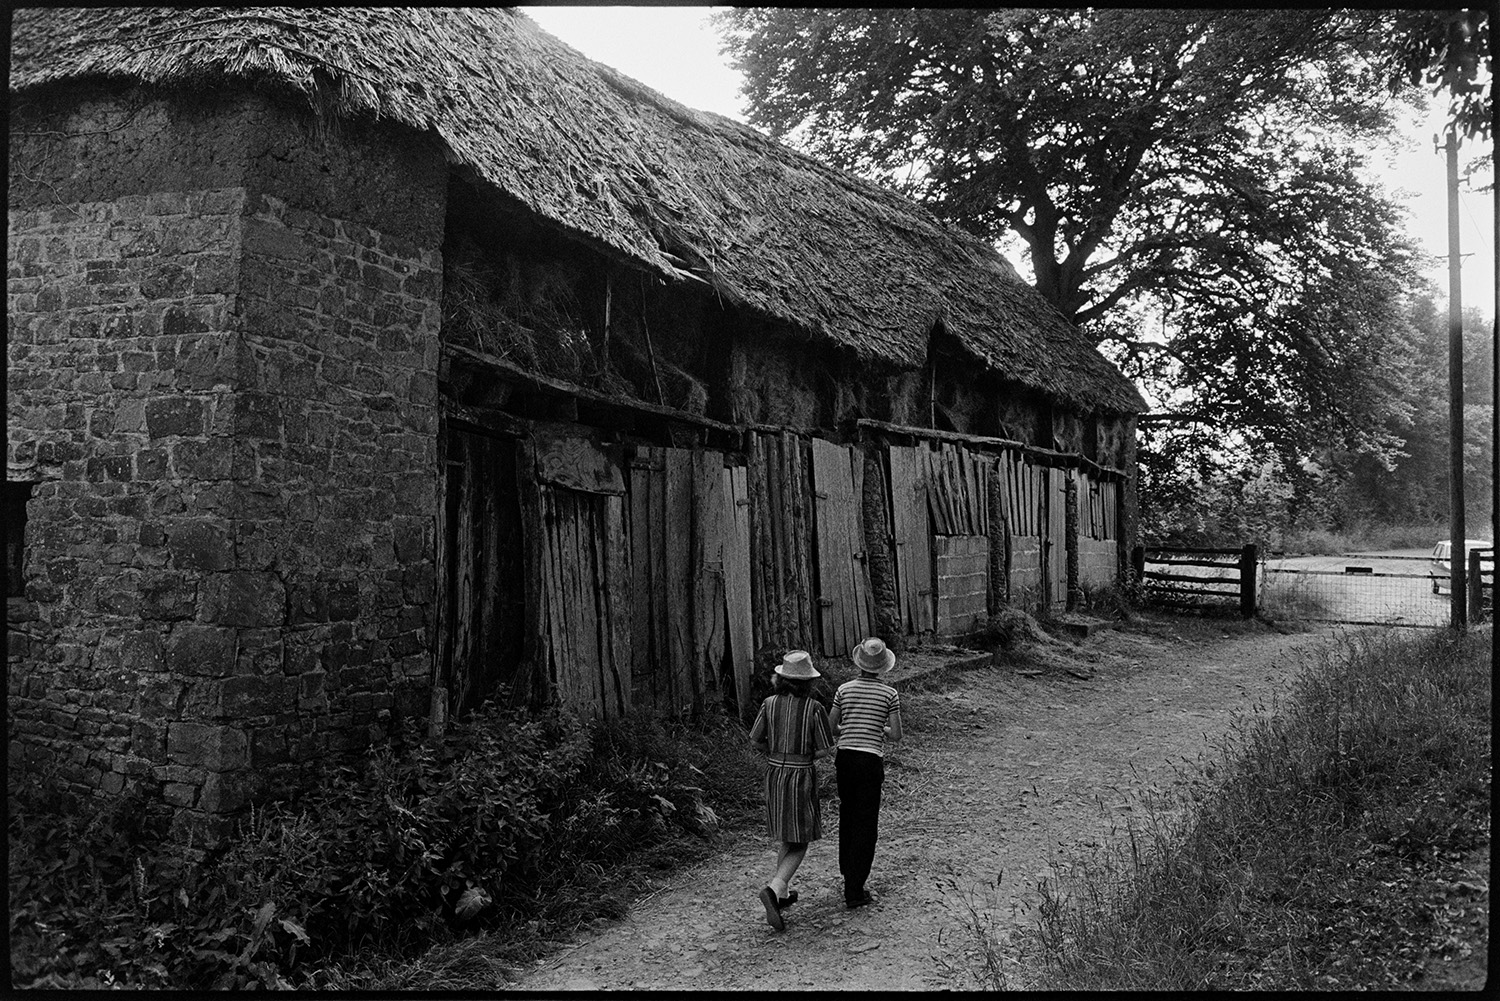 Old thatched barn, extremely interesting. 
[A boy and girl walking past a stone and thatch barn at Deckport, Hatherleigh. Hay bales are being stored in the barn. The bottom part of the barn is covered with sheets of wood and corrugated iron.]